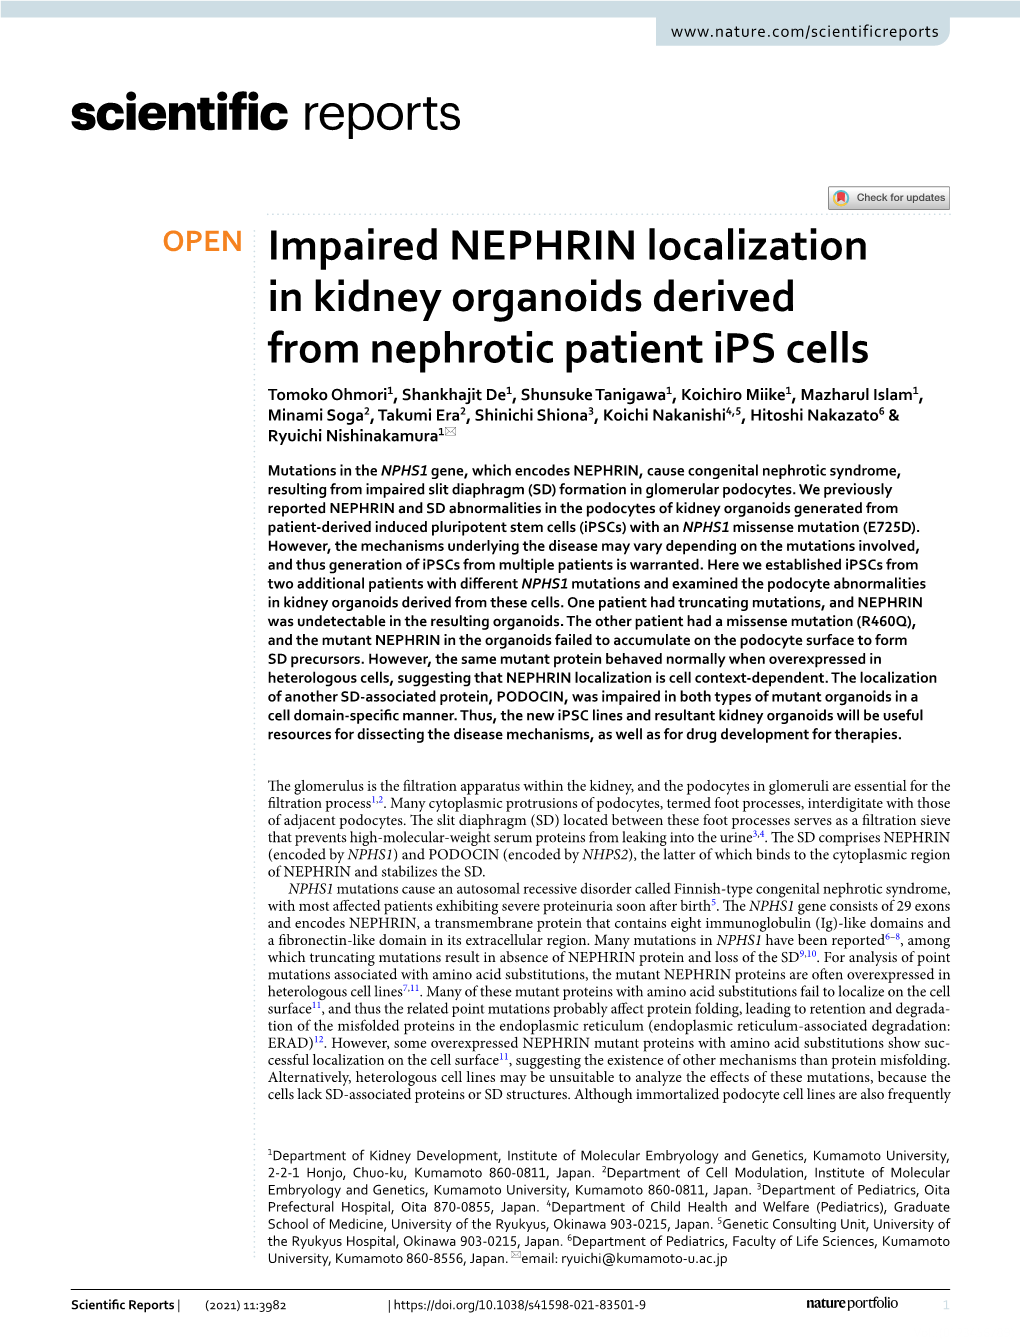 Impaired NEPHRIN Localization in Kidney Organoids Derived from Nephrotic Patient Ips Cells